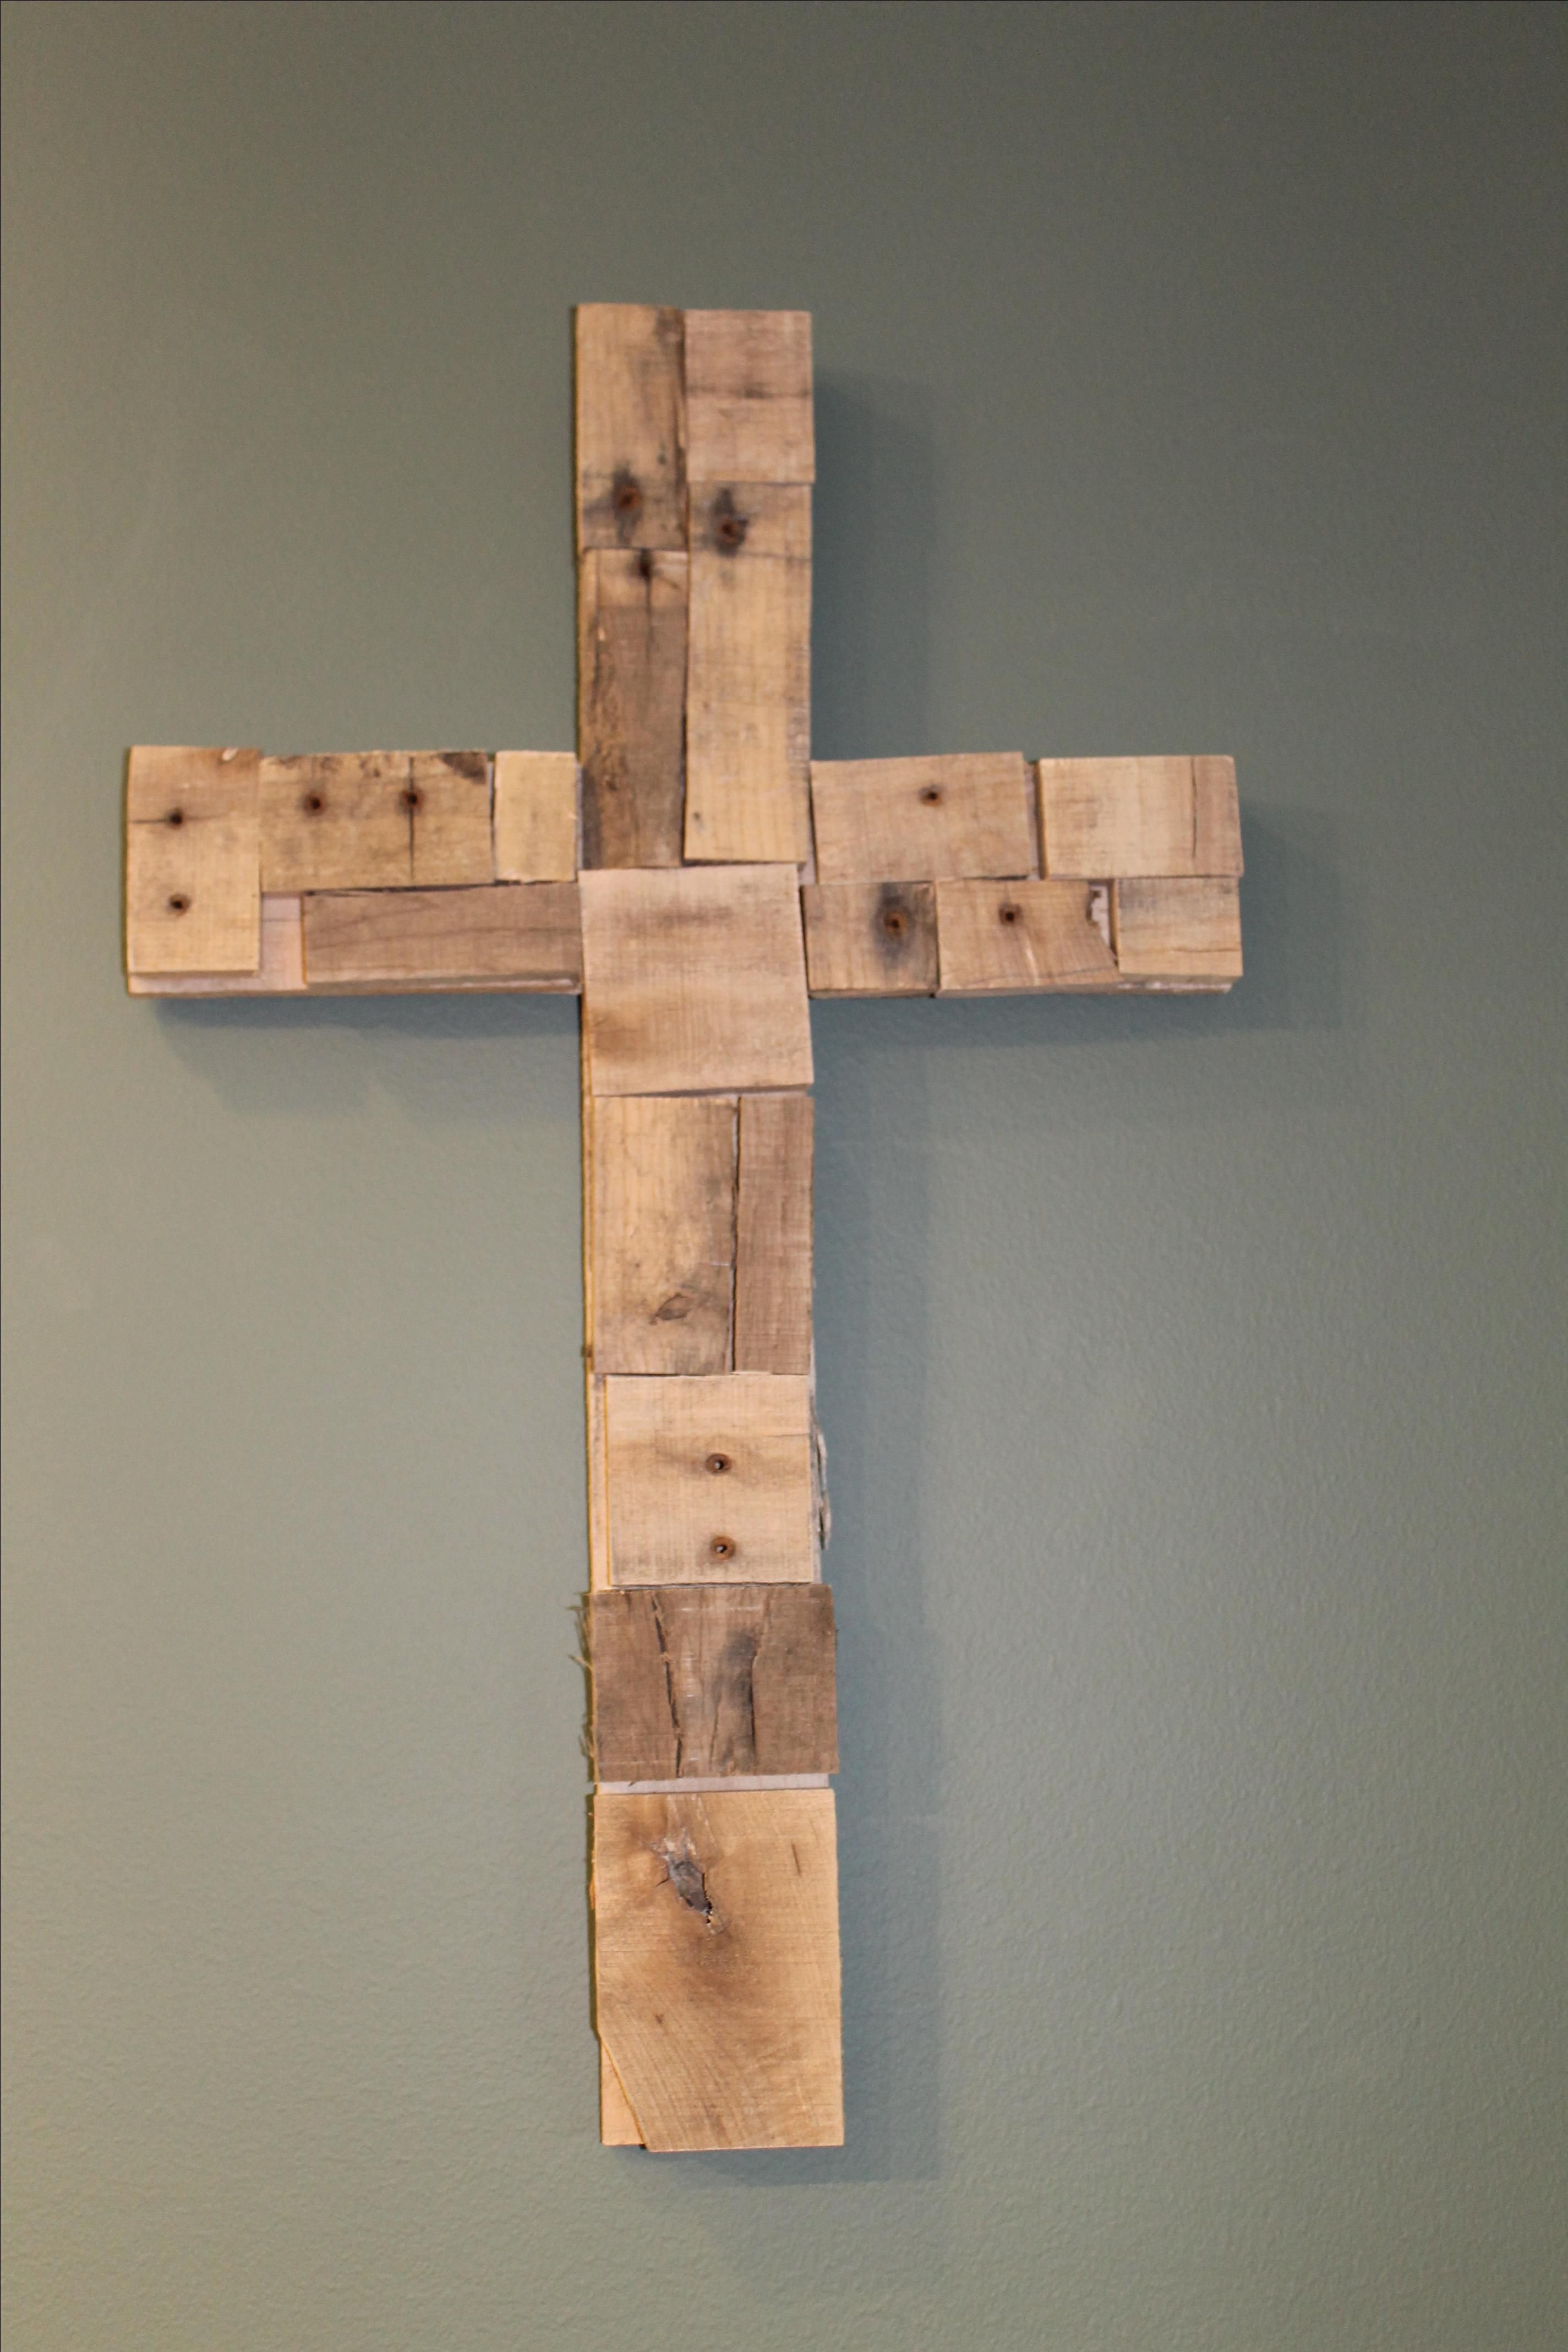 Buy Handmade Pallet Wood Cross Made To Order From I Mobili Inc